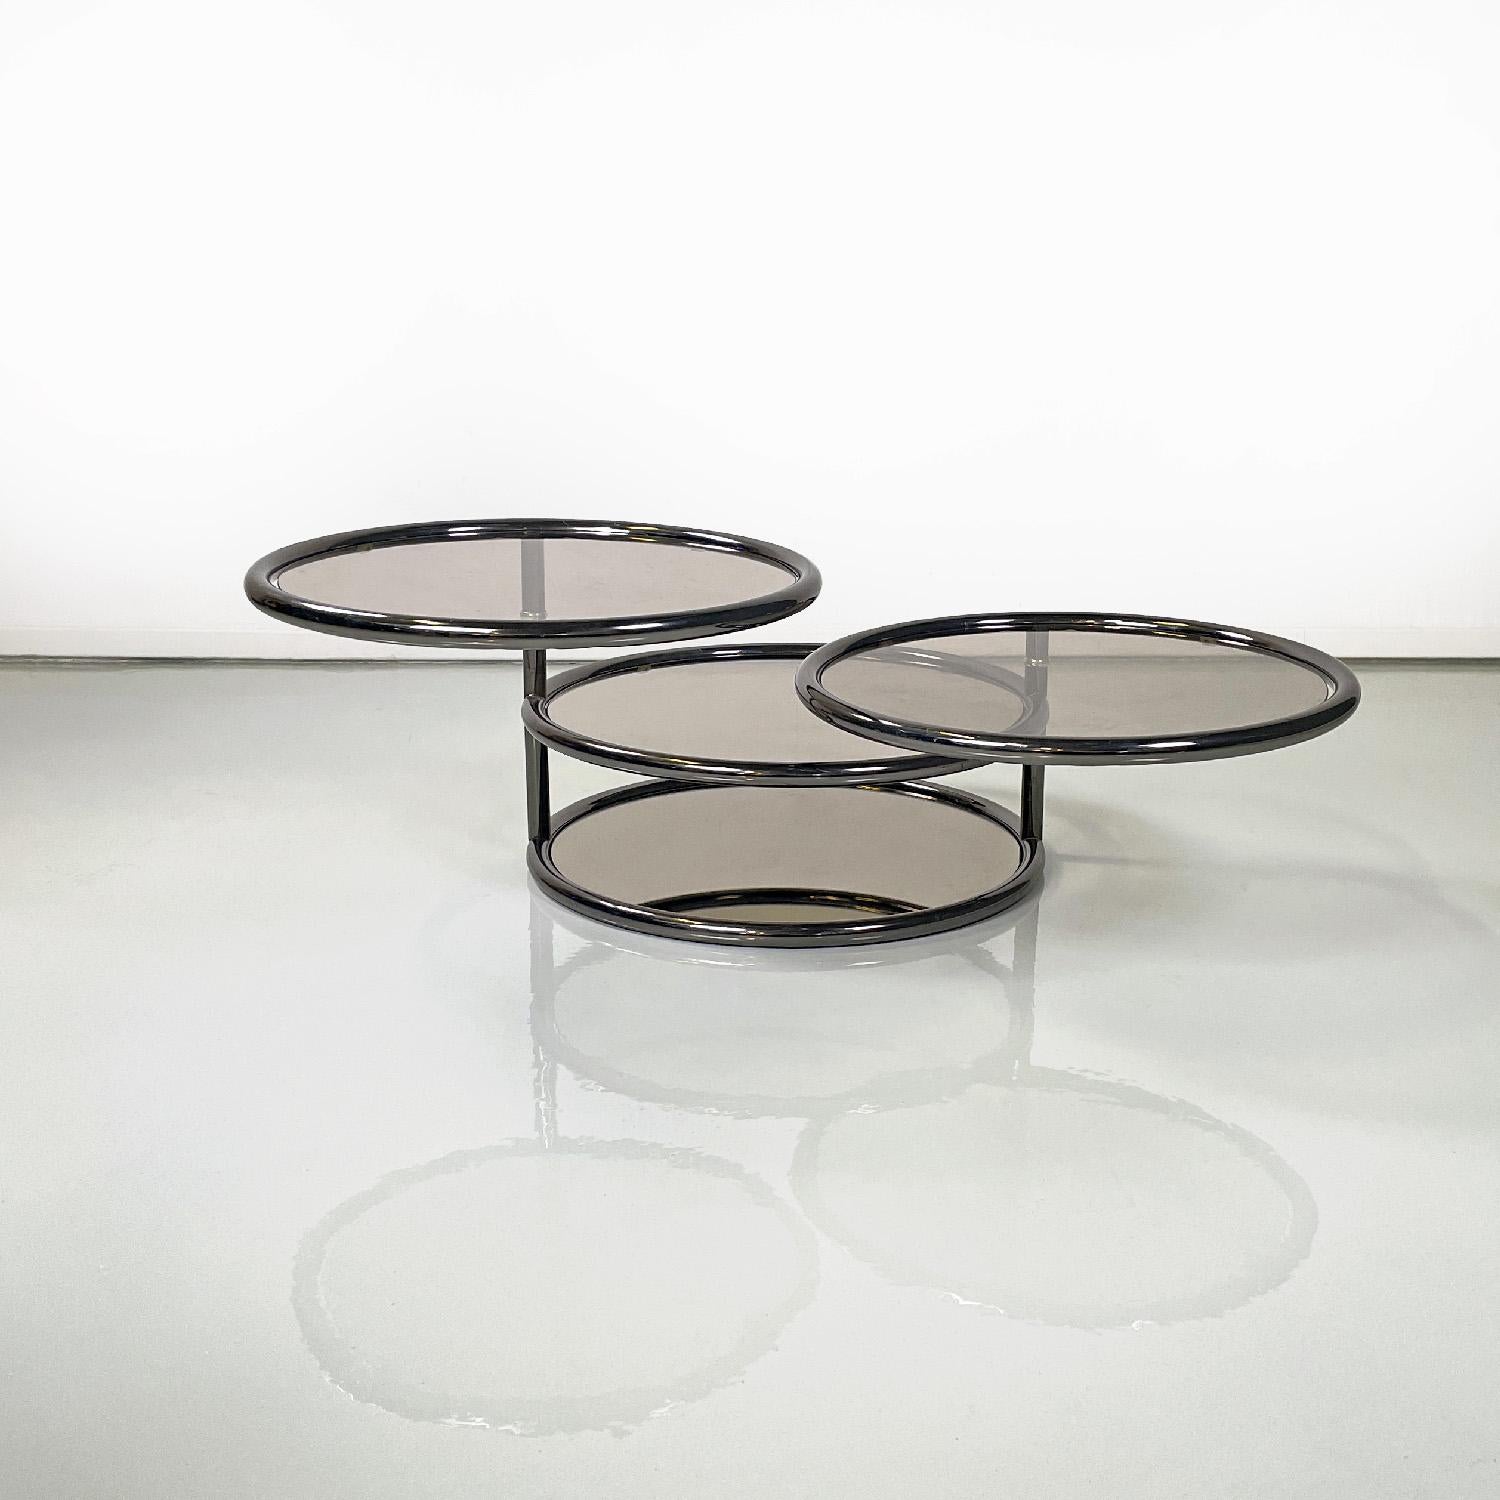 Italian modern coffee table in smoked glass and metal with swivel tops, 1970s
Round base coffee table. The structure is in dark chromed metal tubing, and is composed of four smoked glass shelves, the upper two of which are removable, the lower one